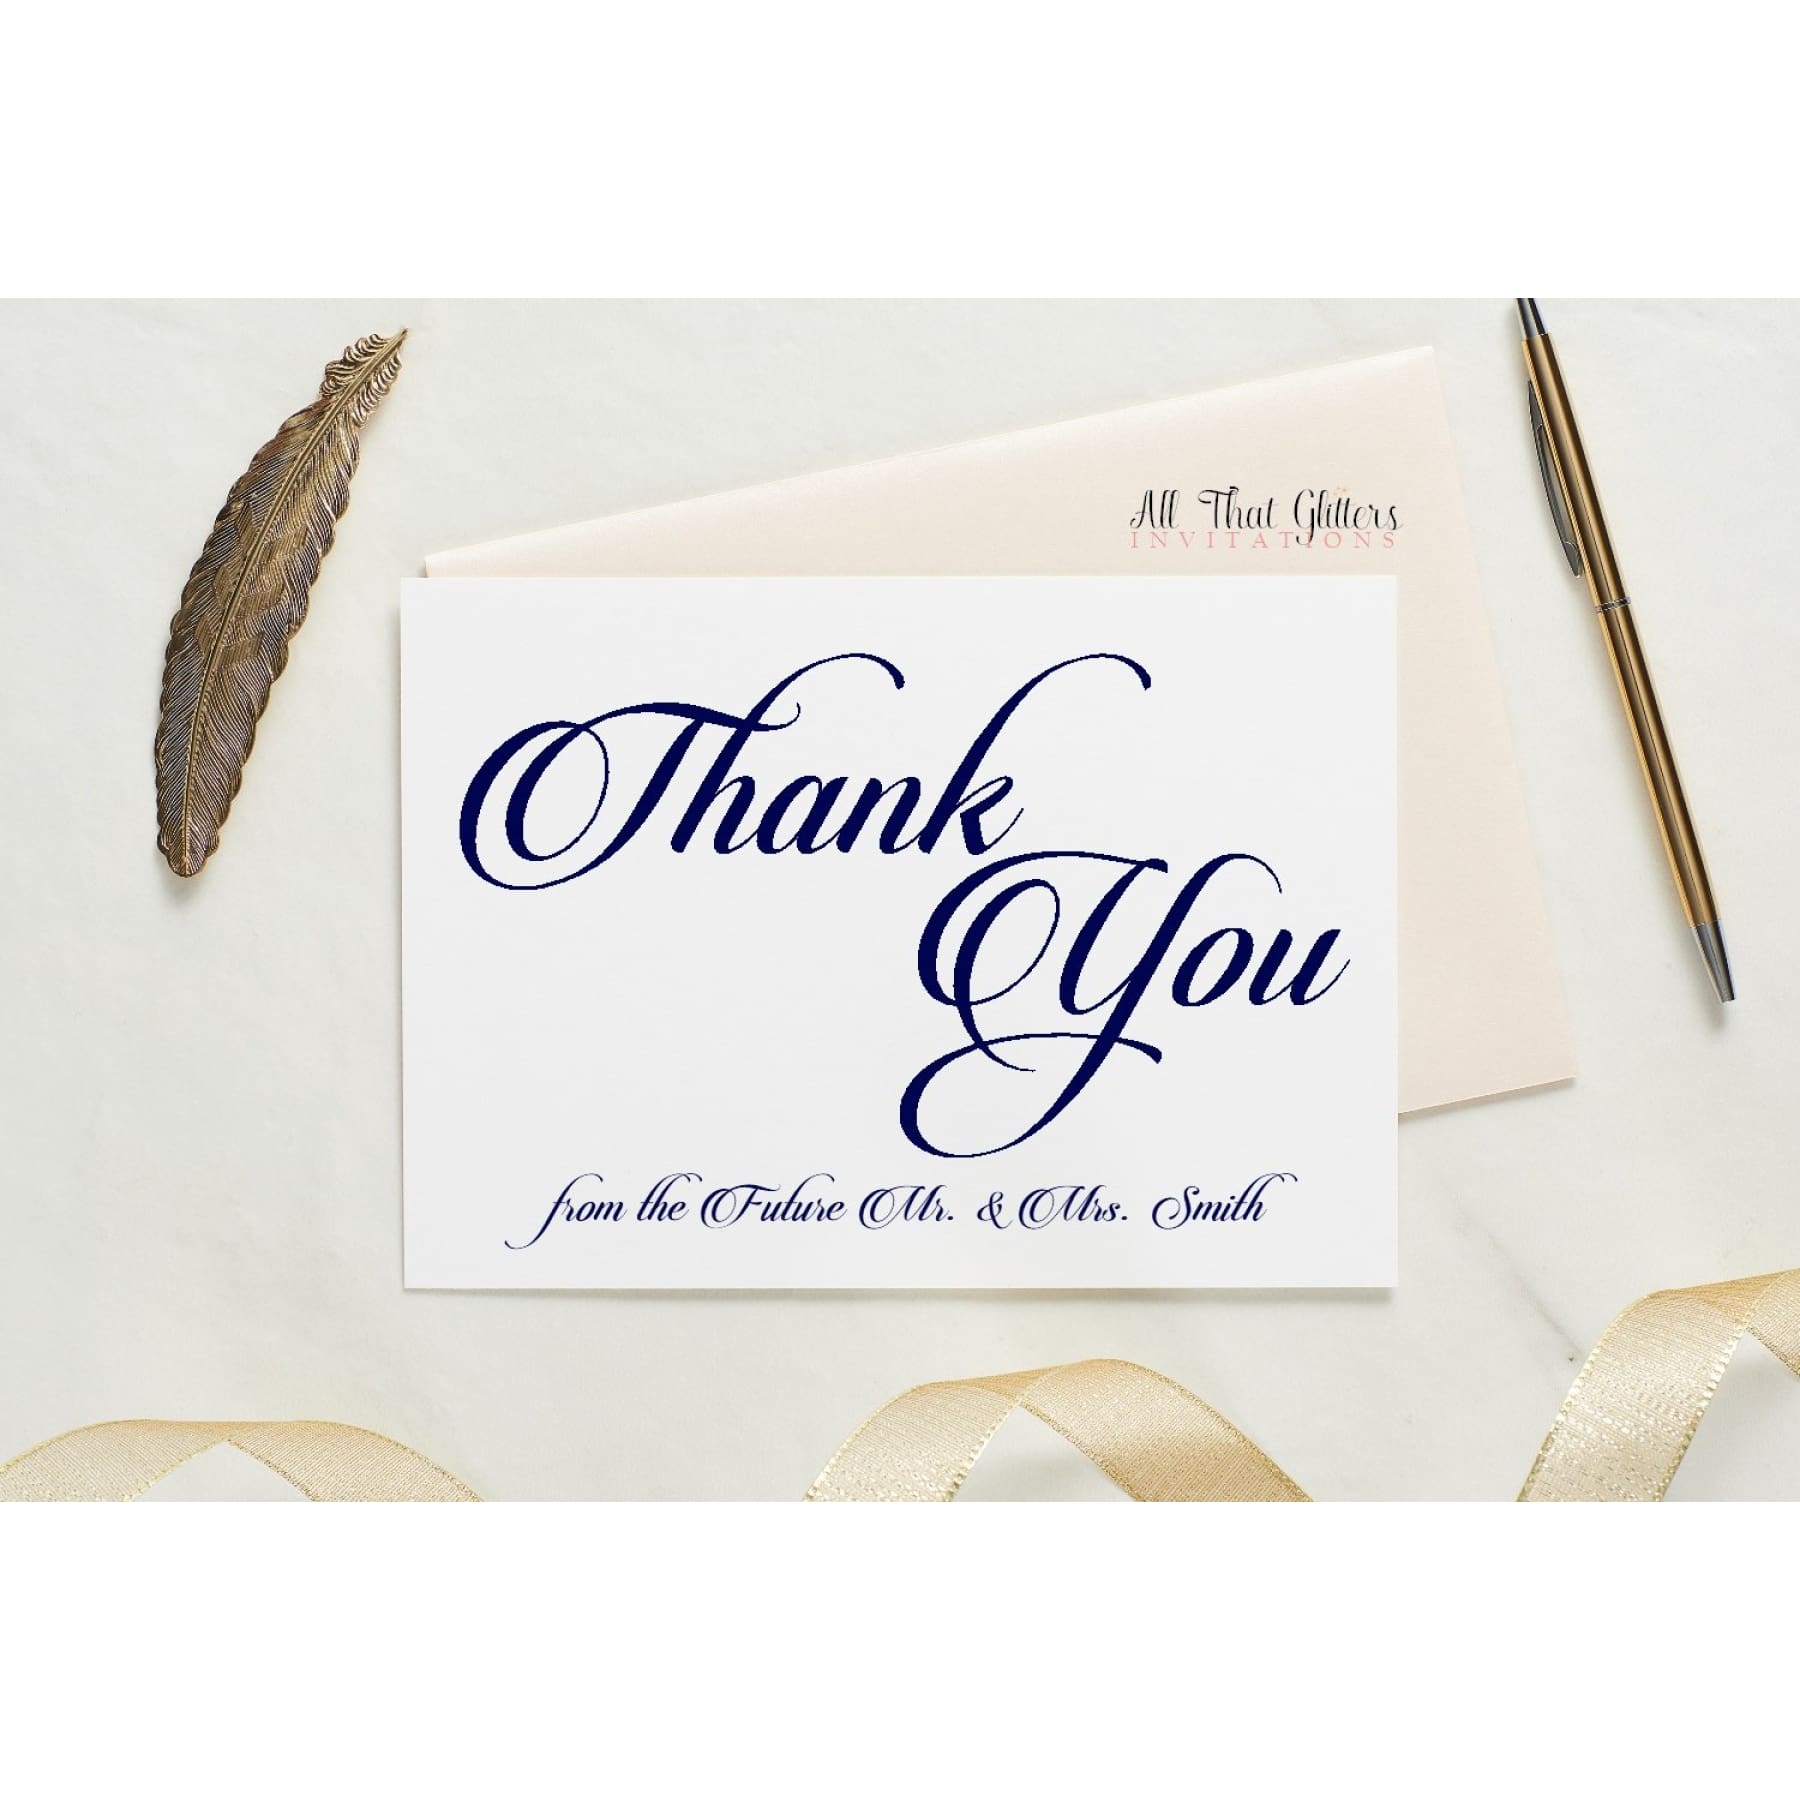 Folded Thank You Card, Karalin Style 1 - All That Glitters Invitations